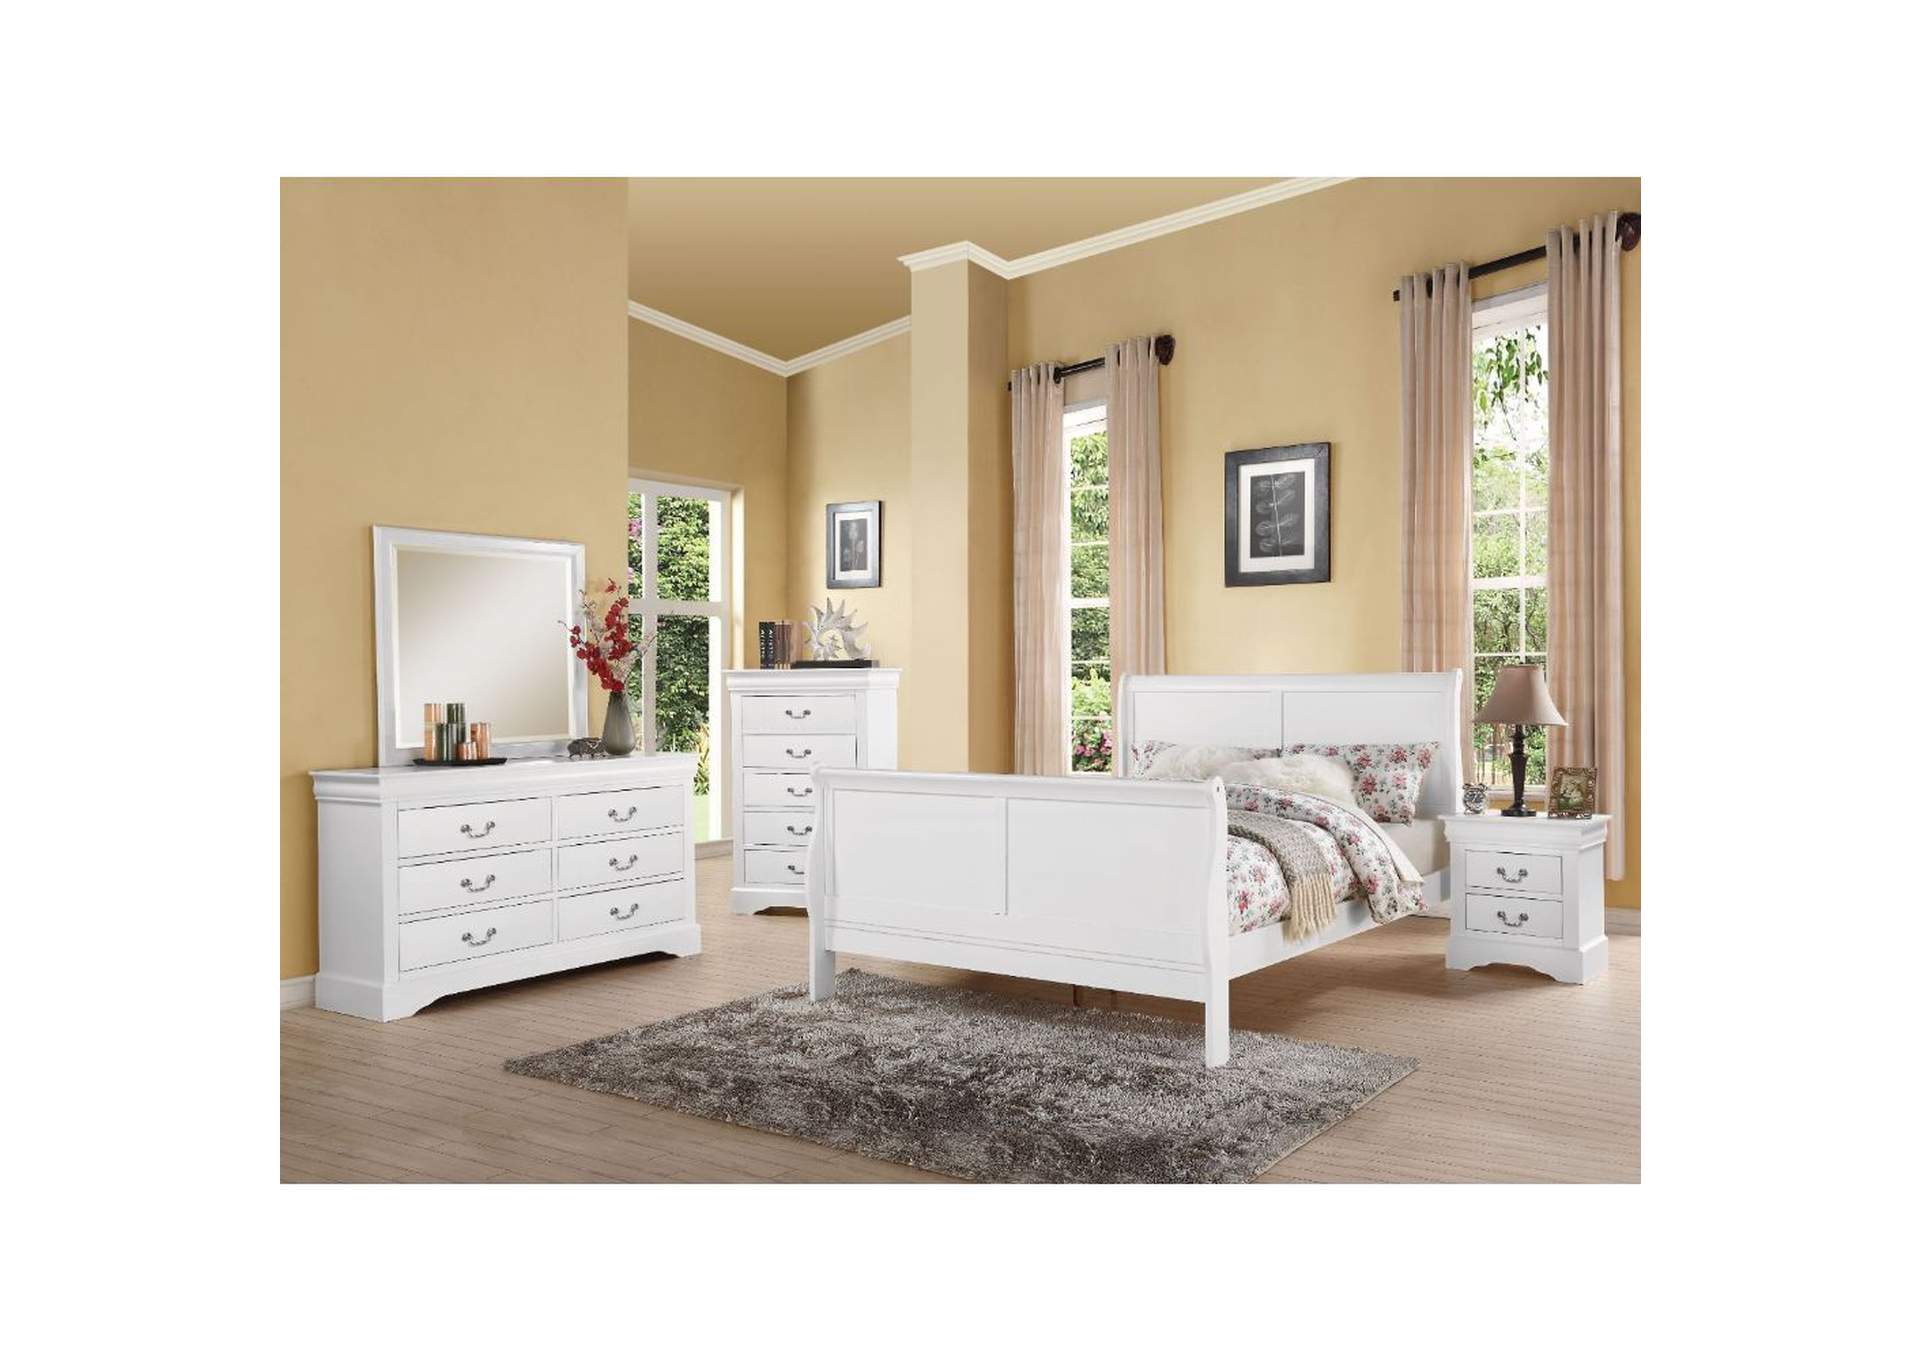 Louis Philippe III Gray Queen Sleigh Bed w/Dresser and Mirror